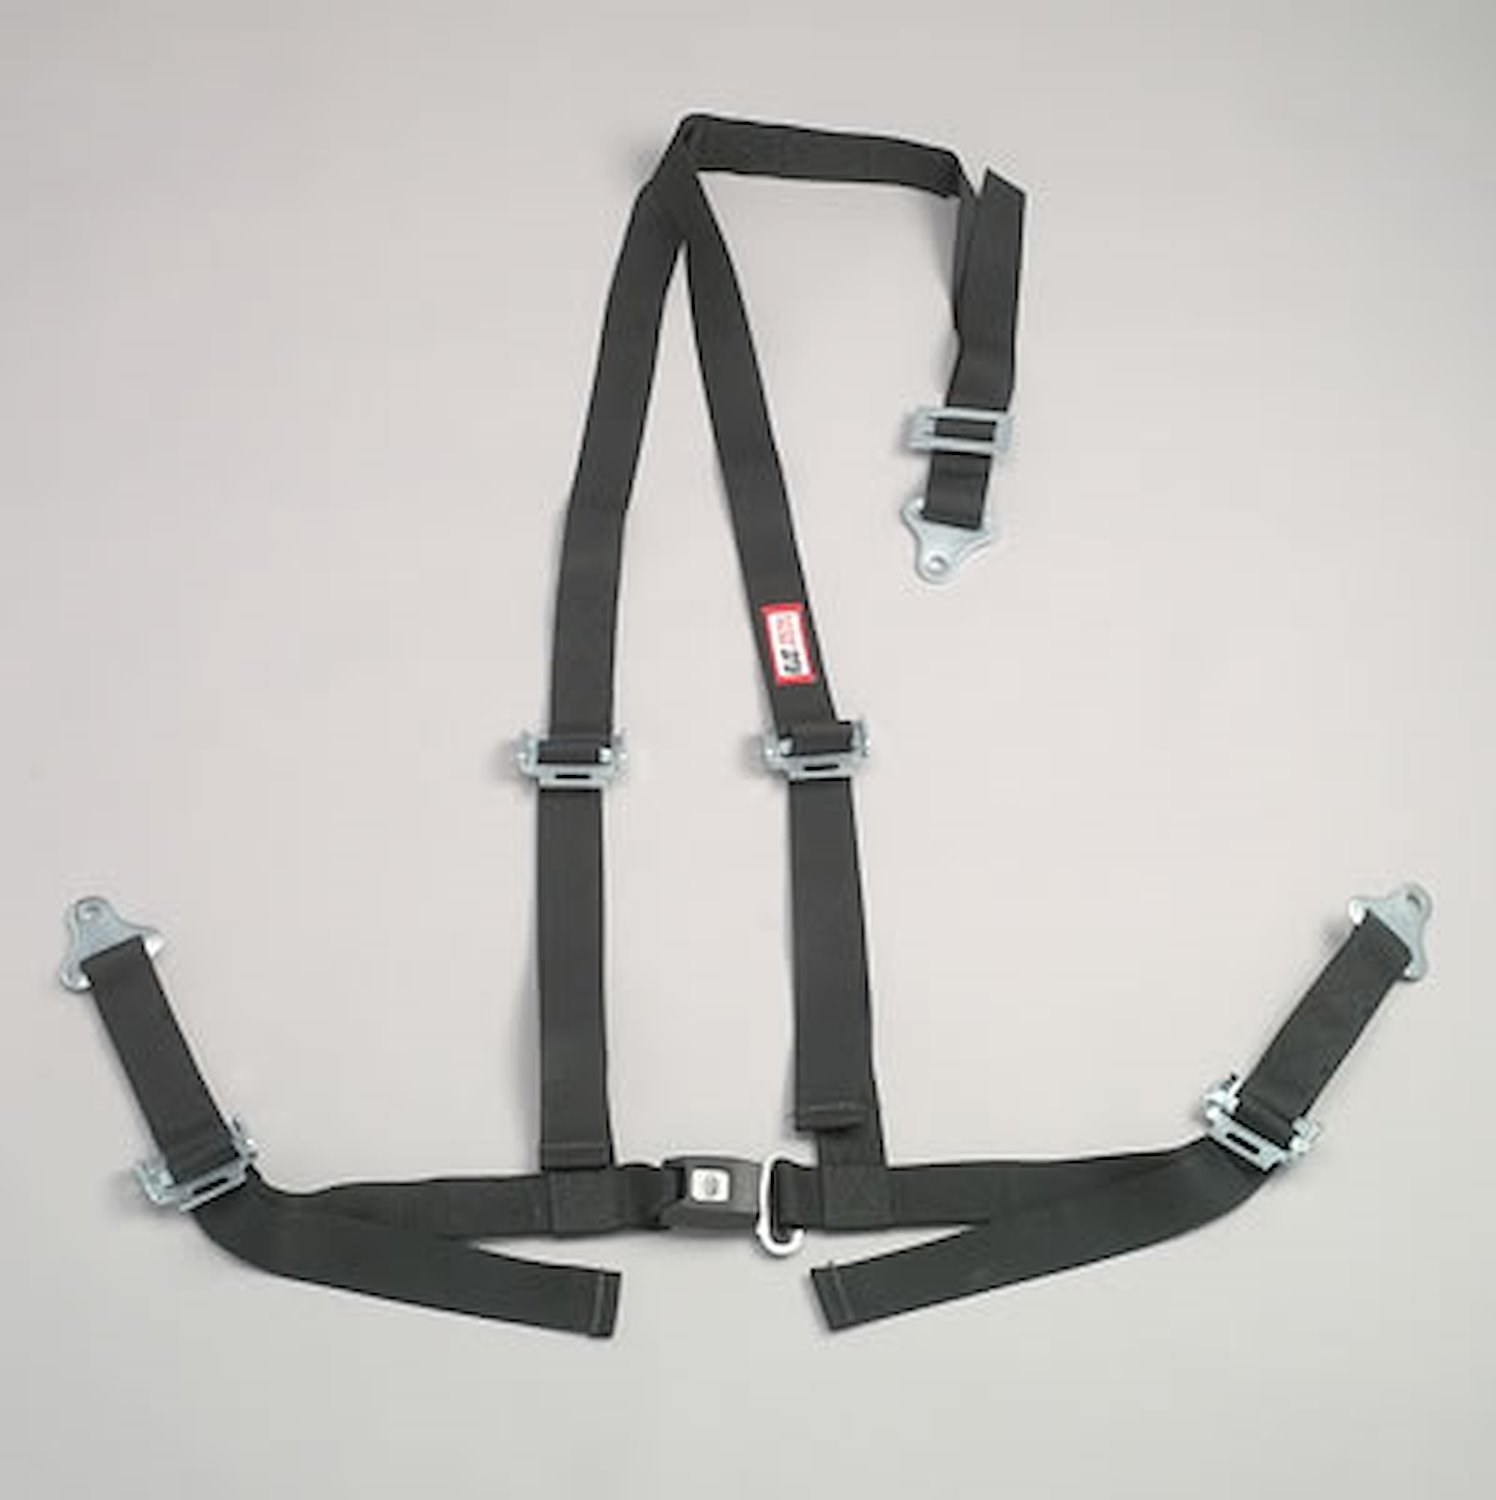 NON-SFI B&T HARNESS 2 PULL UP Lap Belt SNAP 2 S. H. Y FLOOR Mount WRAP/BOLT GRAY